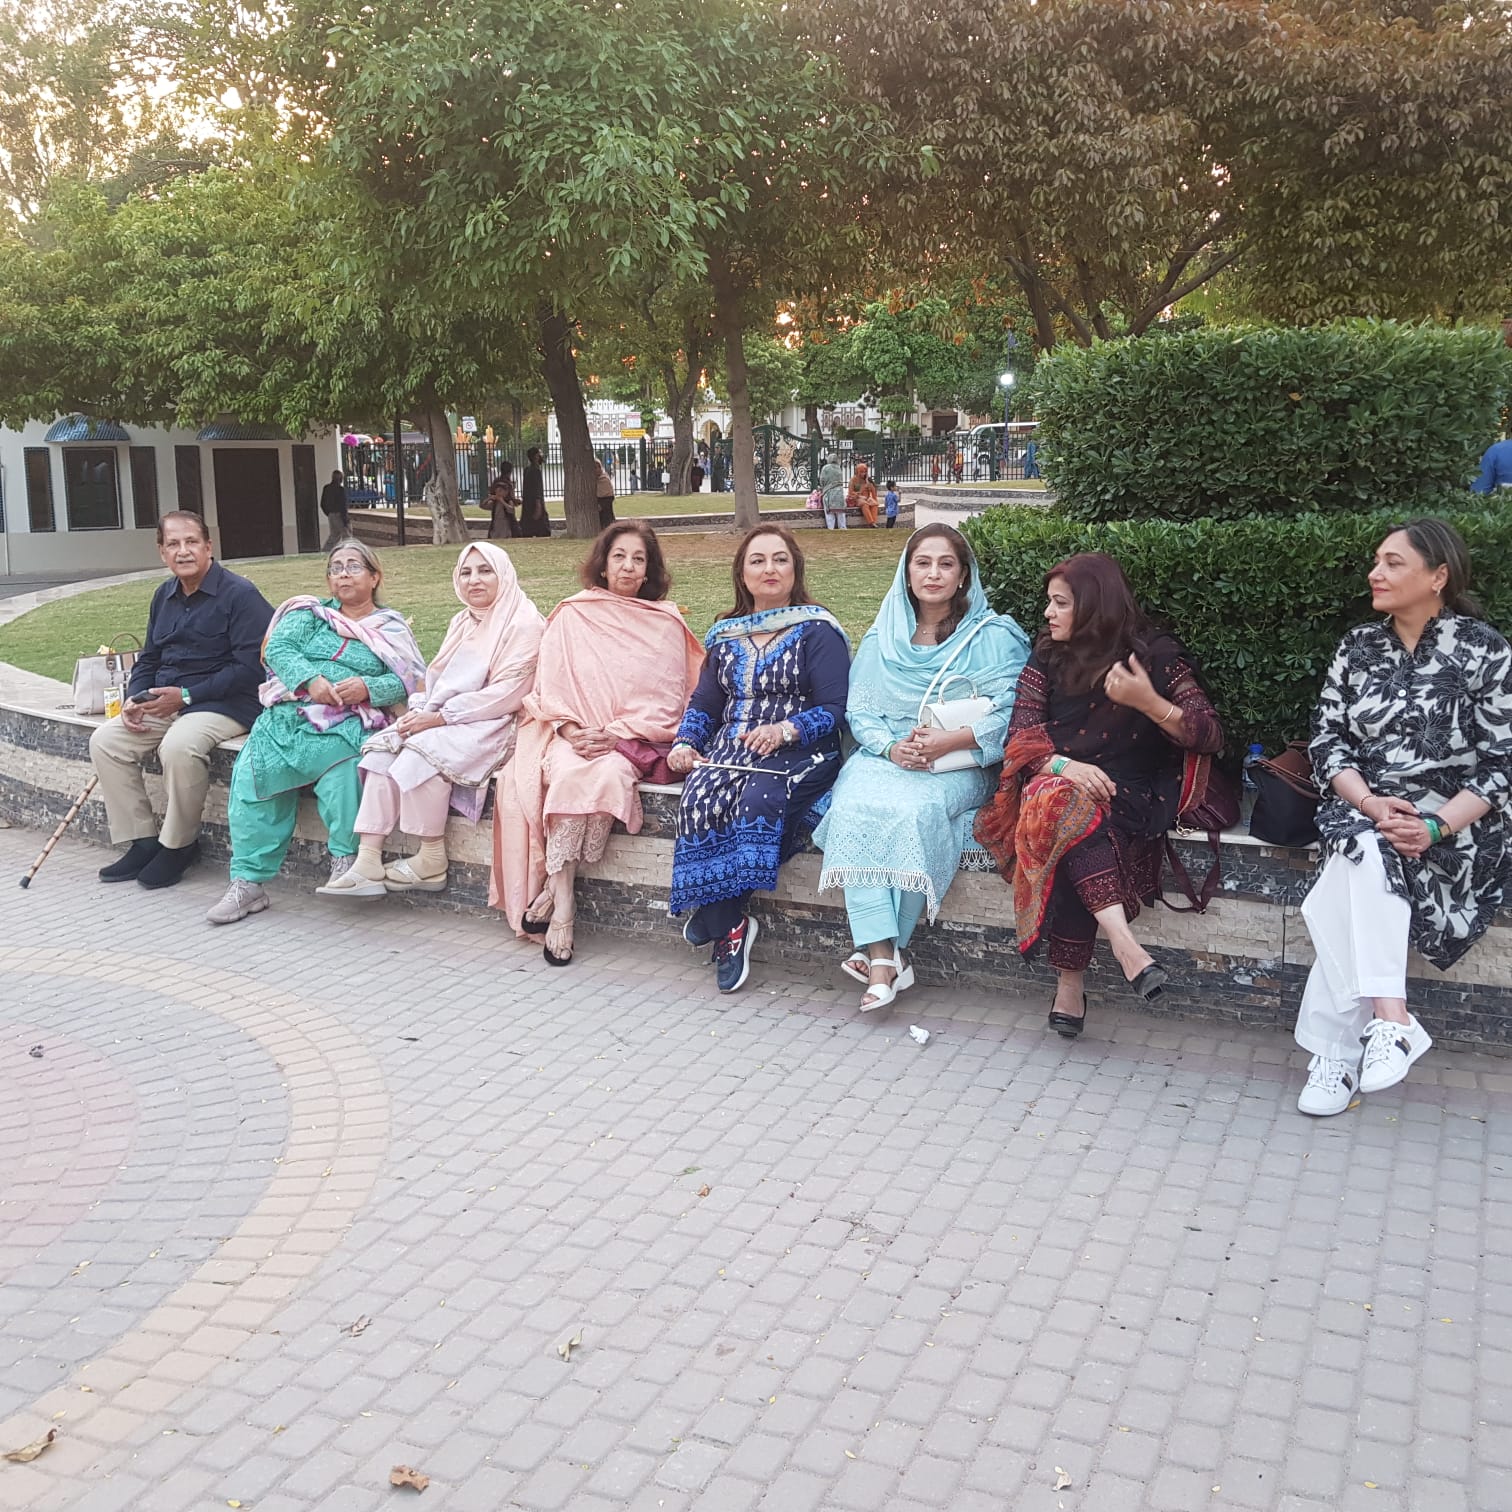 Picnic / Eid Milan Party arranged by Islamabad Chapter at Jungle Barracks